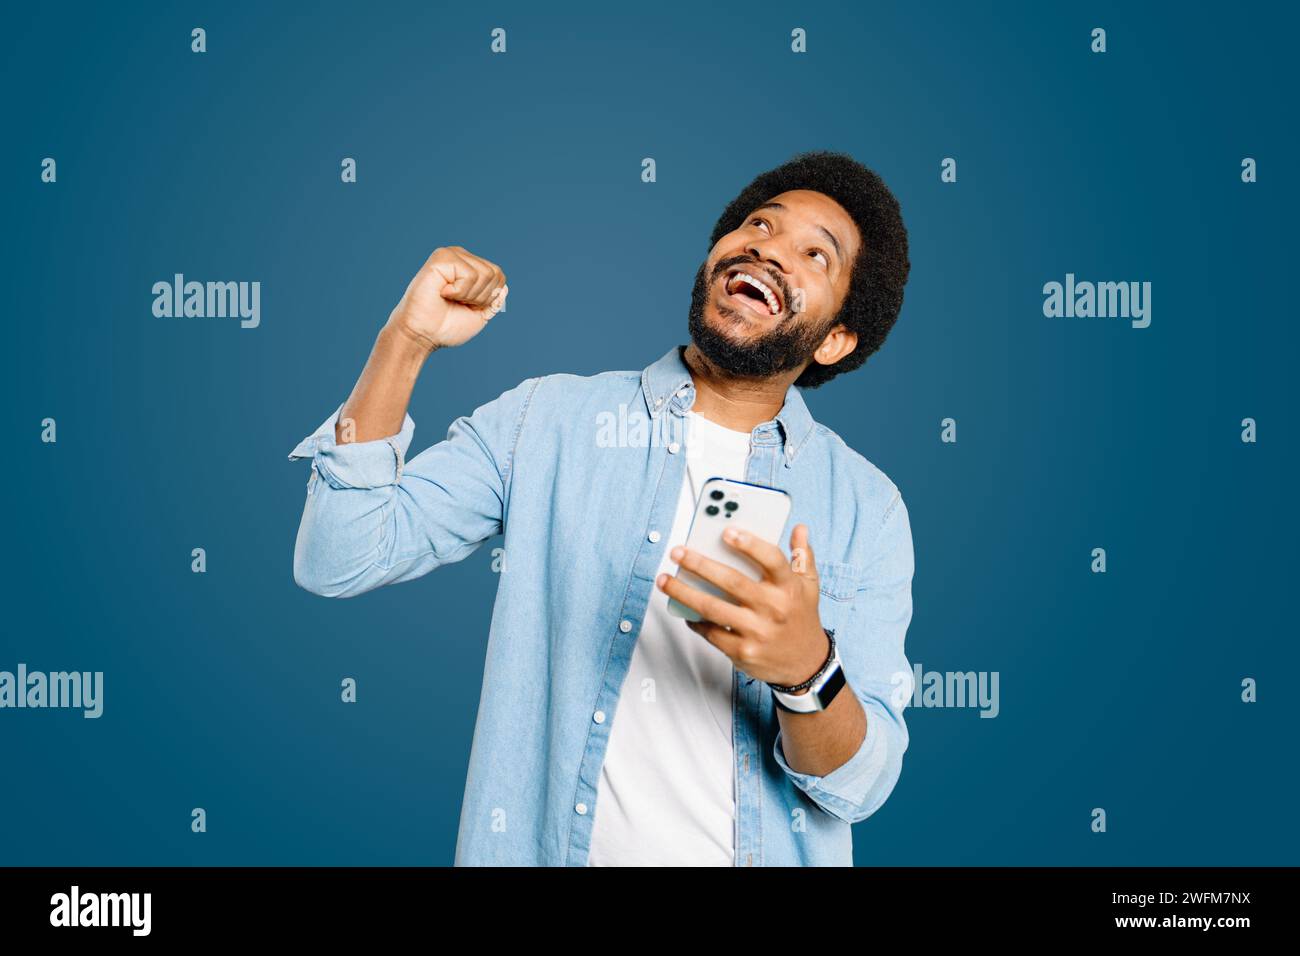 Man is captured in moment of elation, looking upwards and fist pumping air after a successful digital interaction or a win. This portrays a strong emotional response to positive digital communication. Stock Photo